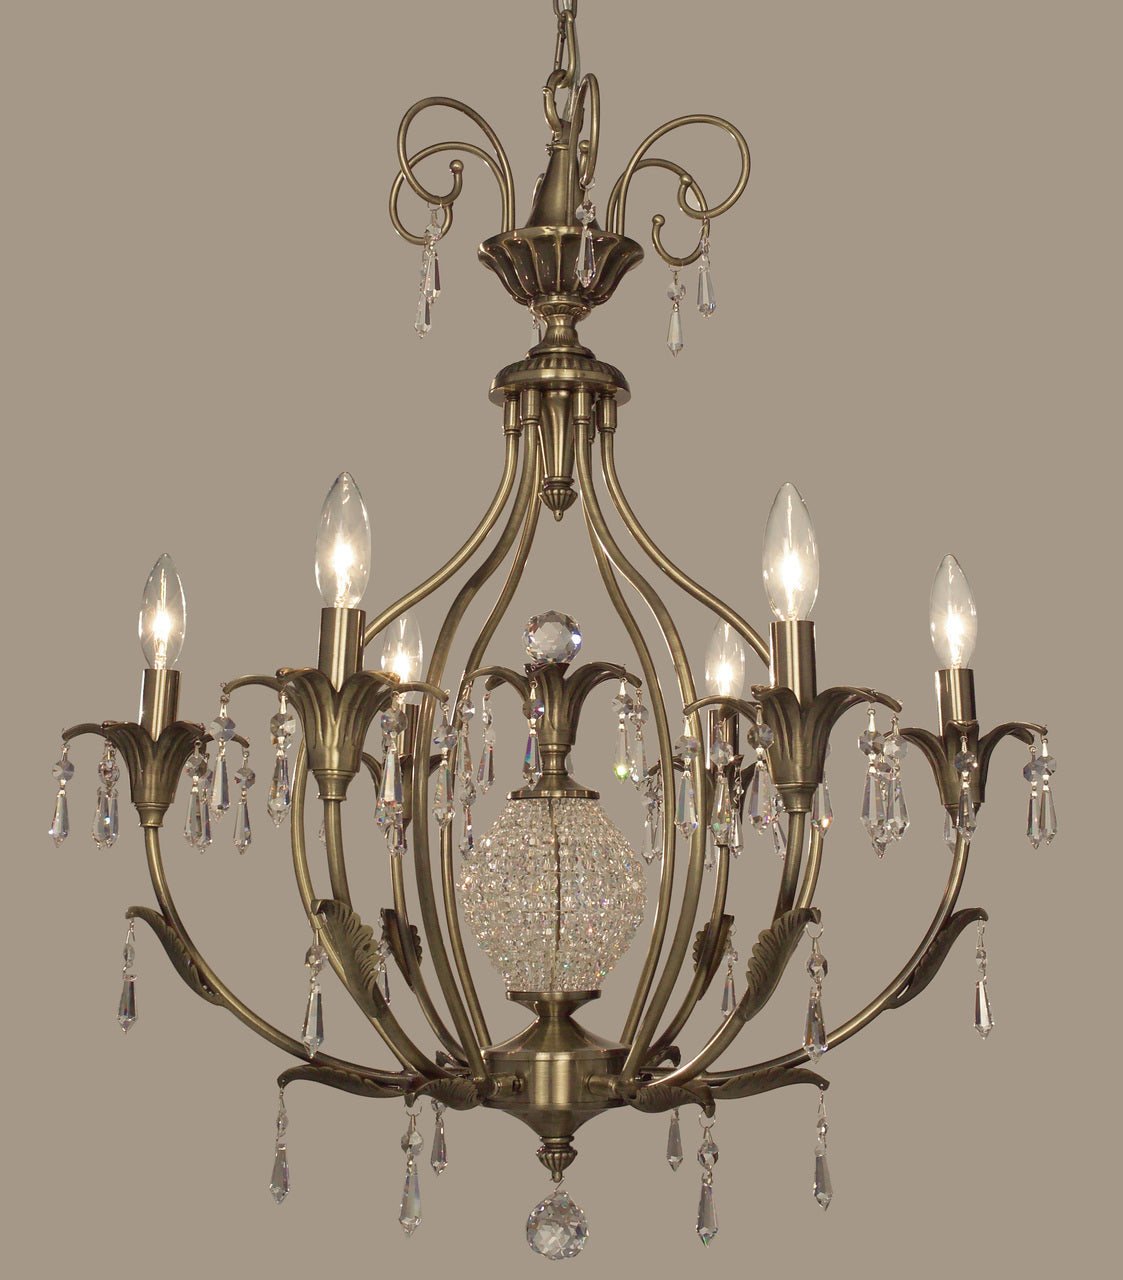 Classic Lighting 16116 ABR CP Sharon Crystal Chandelier in Antique Brass